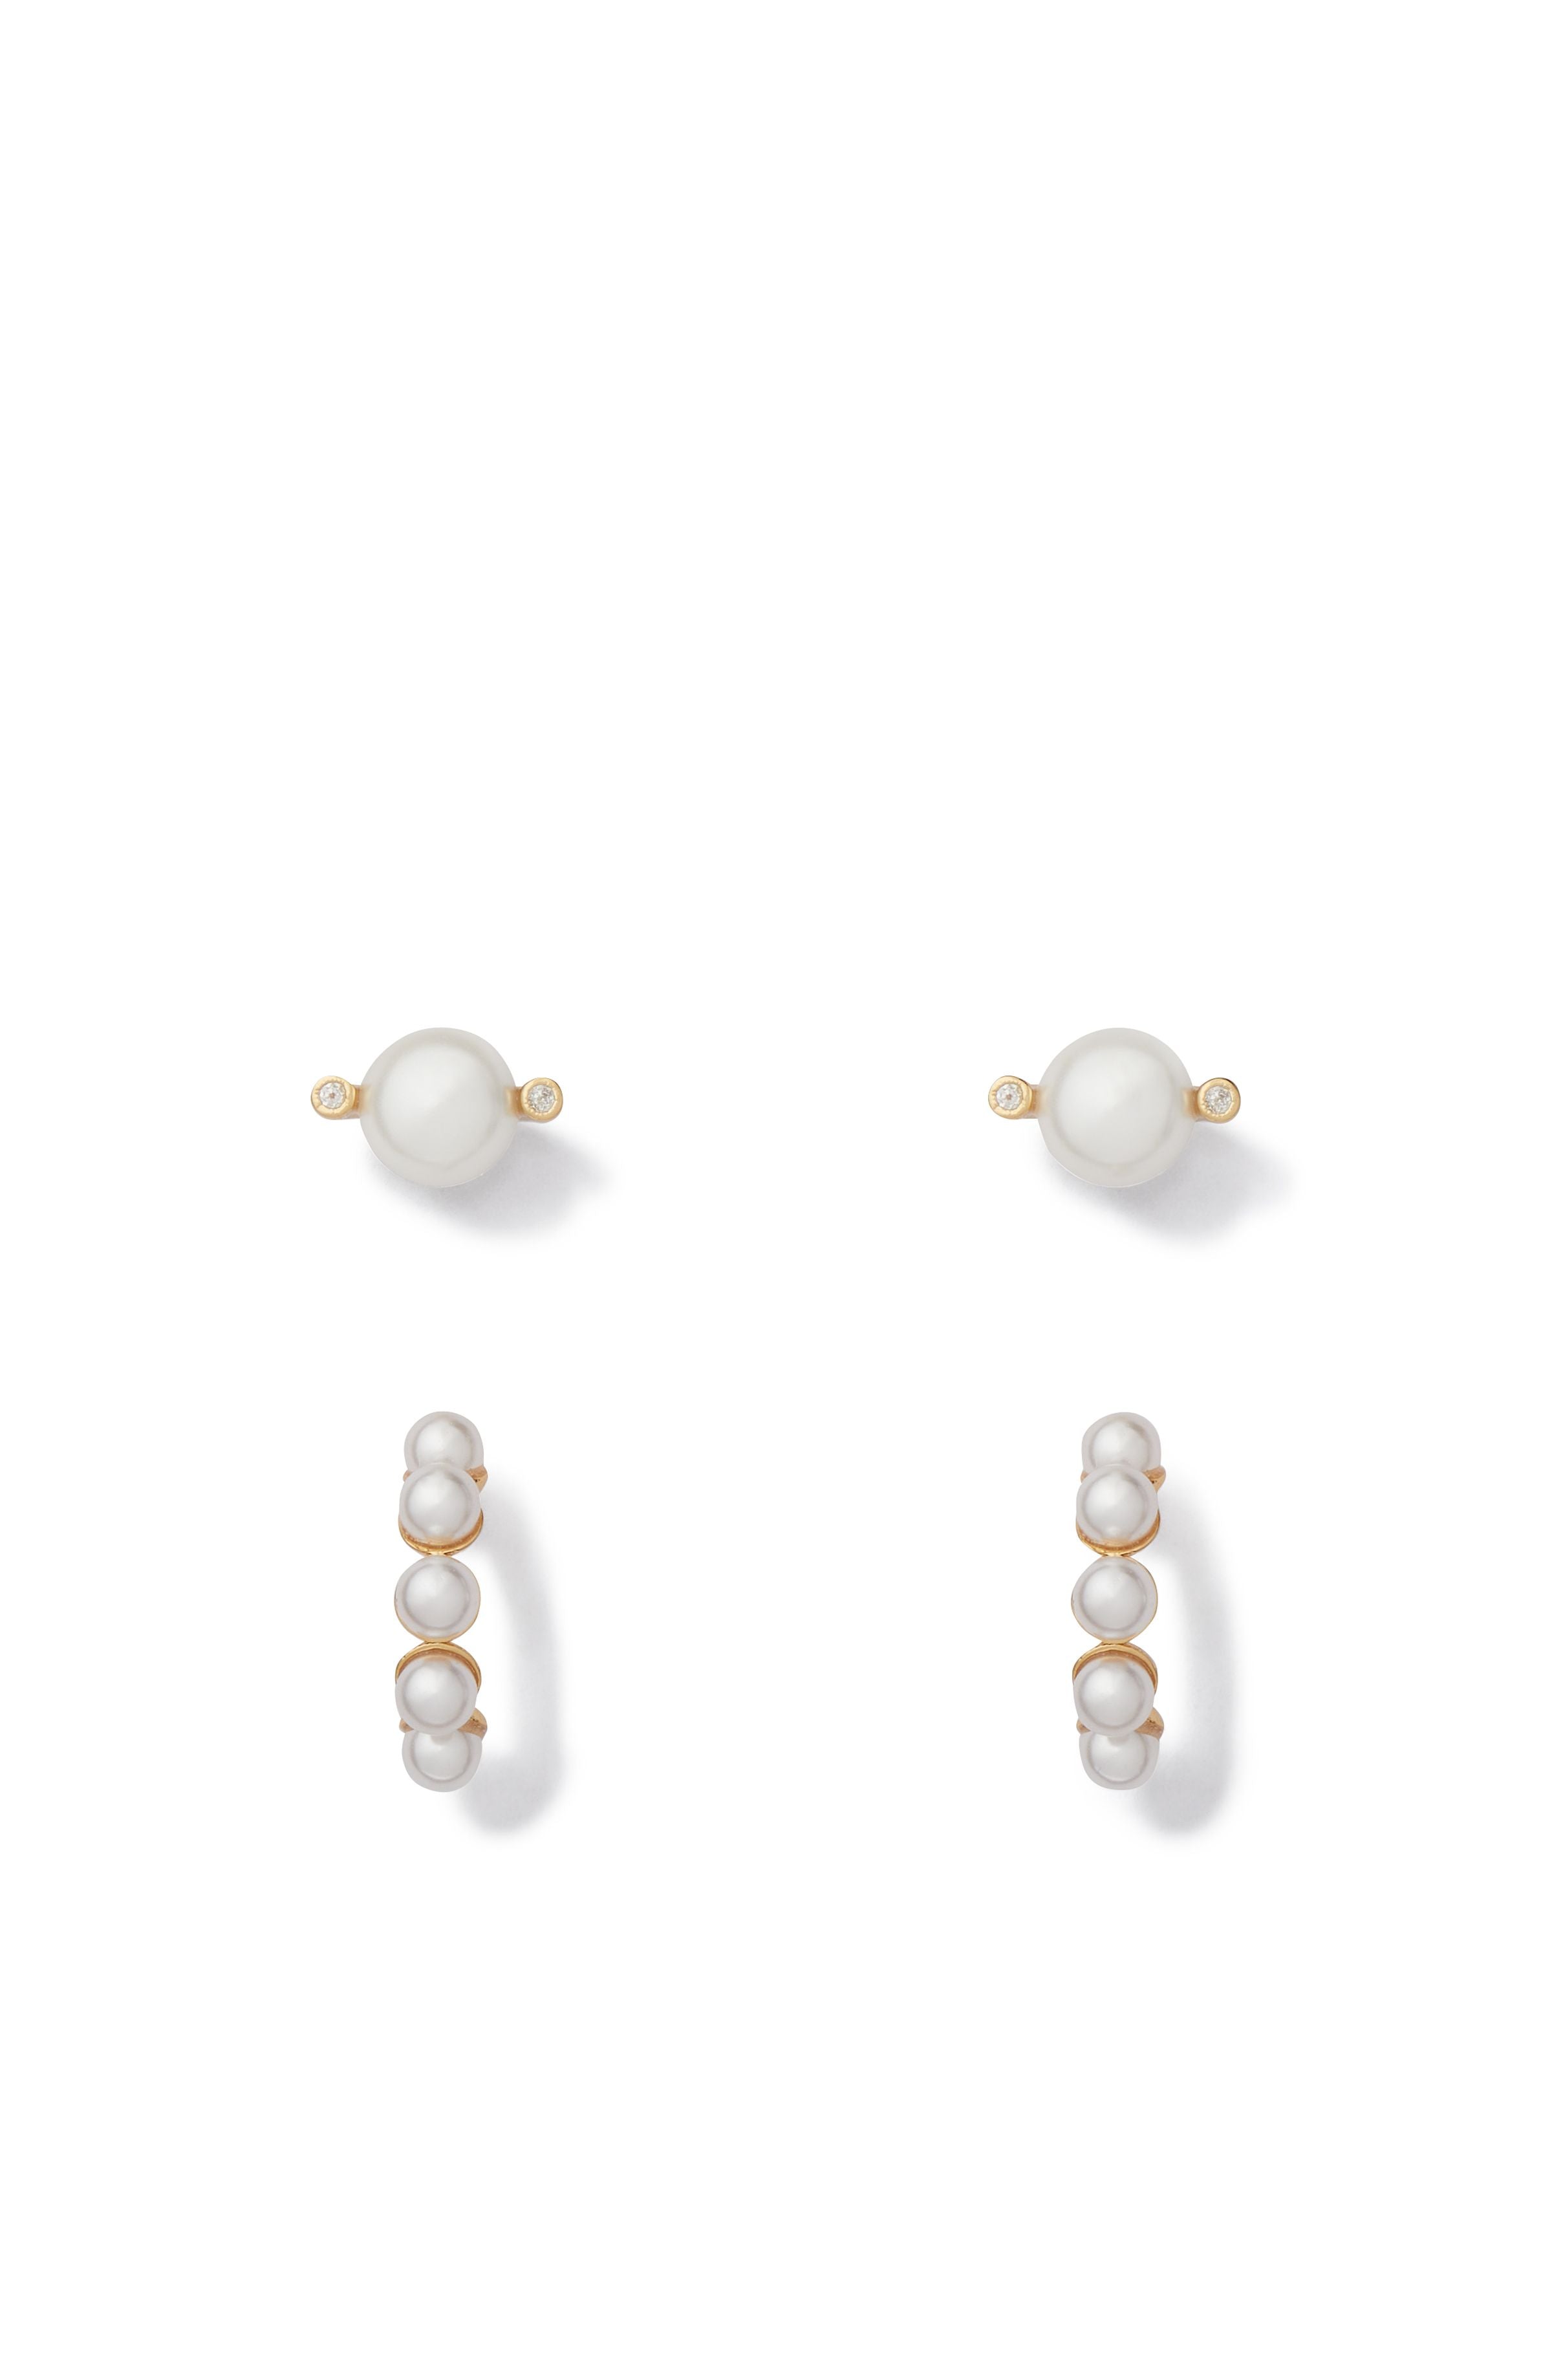 KD959-curated set earrings-Cream/Gold